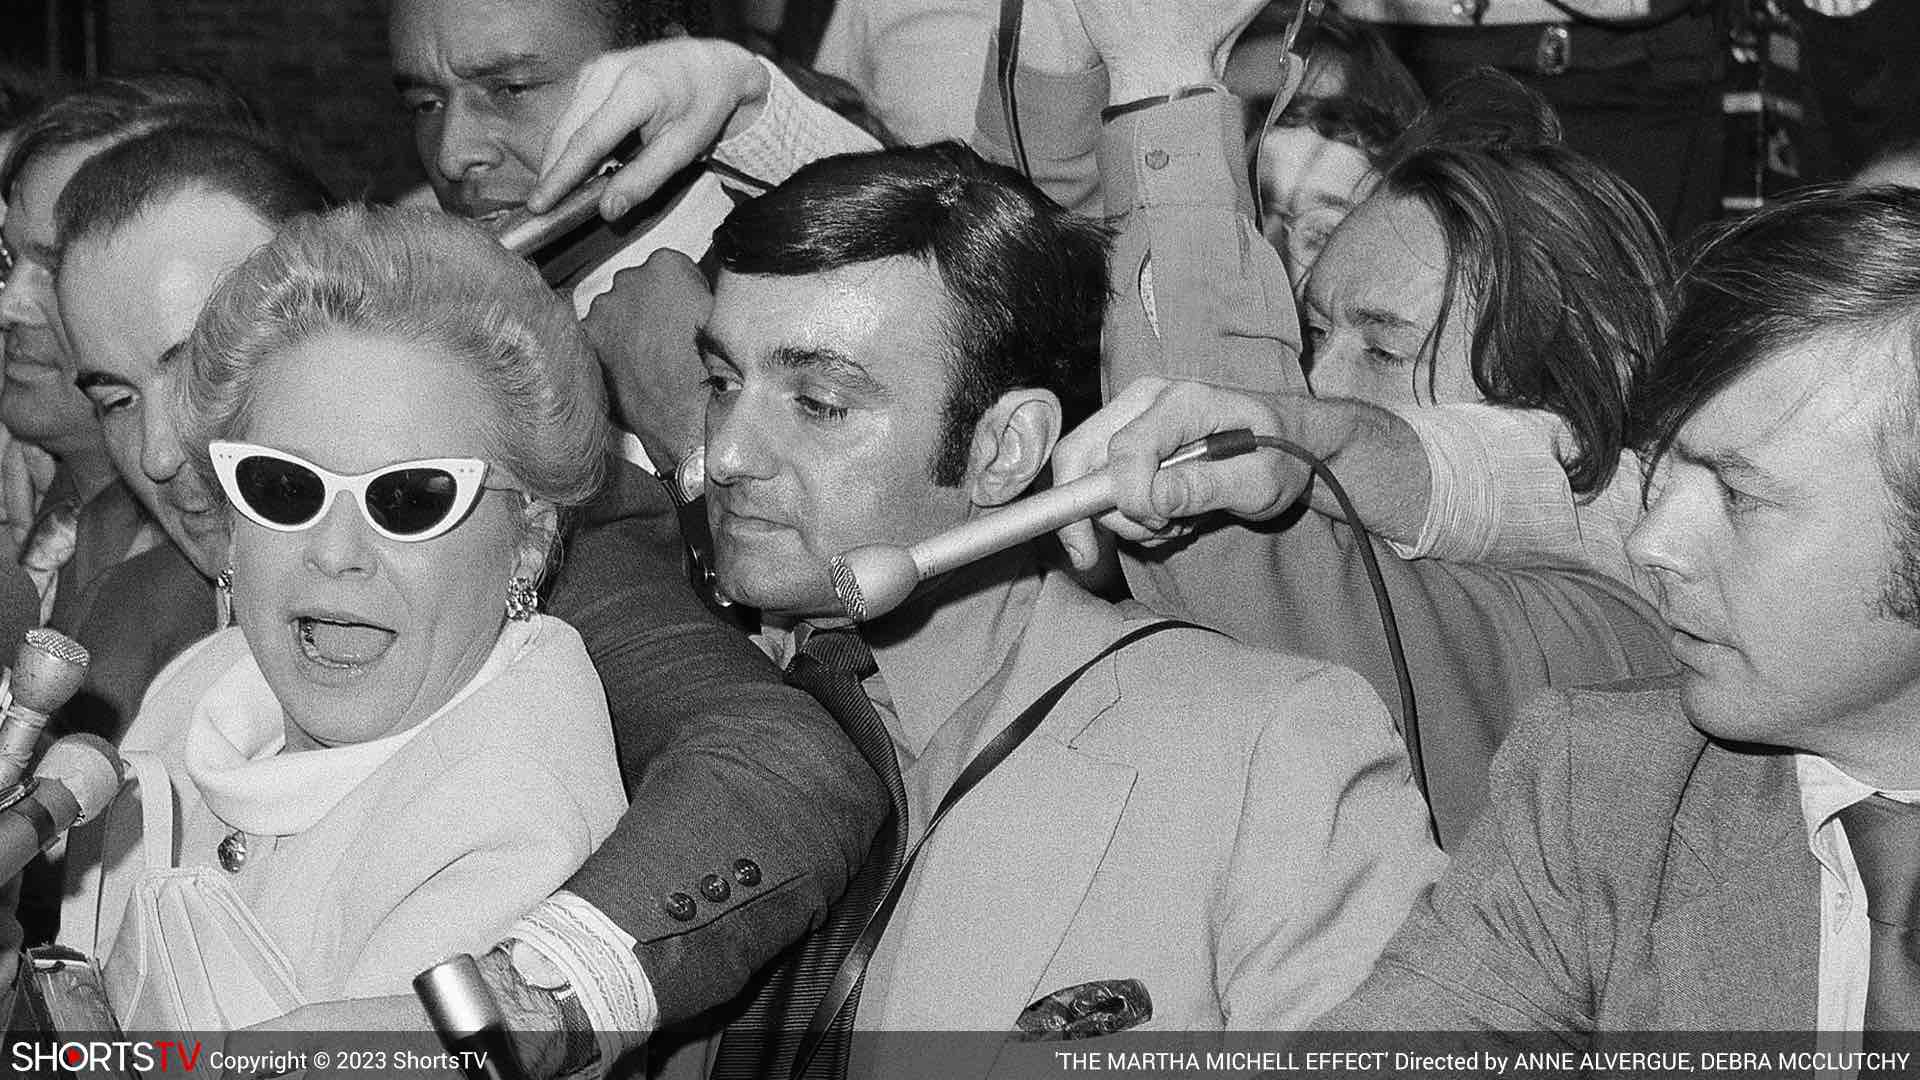 Martha Mitchell in black sunglasses attacked by multiple reporters as they point their microphones to interview her in The Martha Mitchell Effect, an Oscar 2023 nominated short documentary